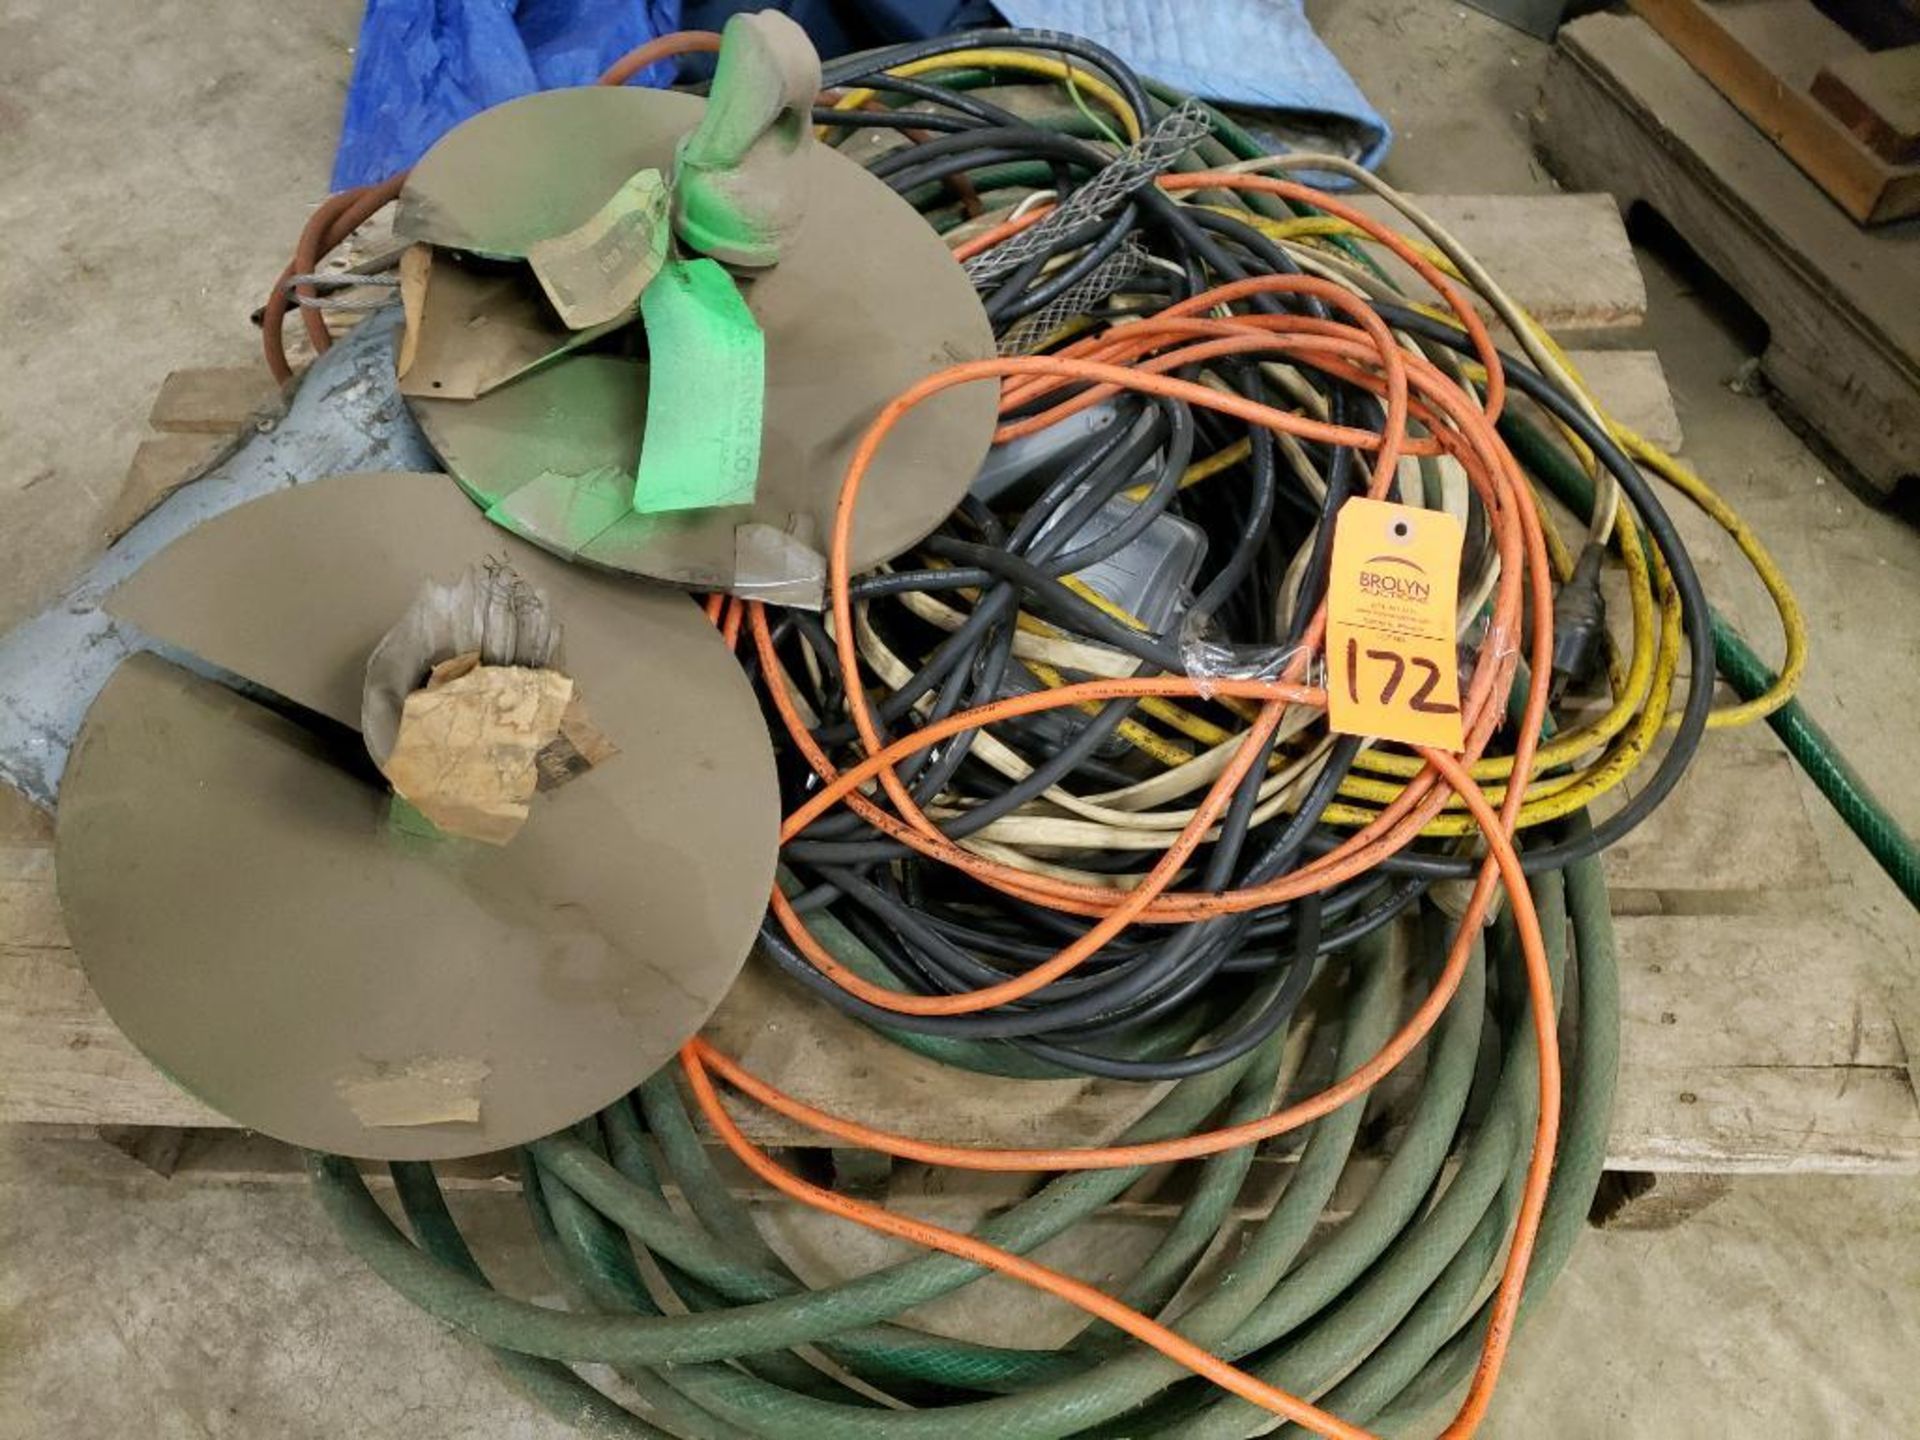 Pallet of assorted cords and hose.